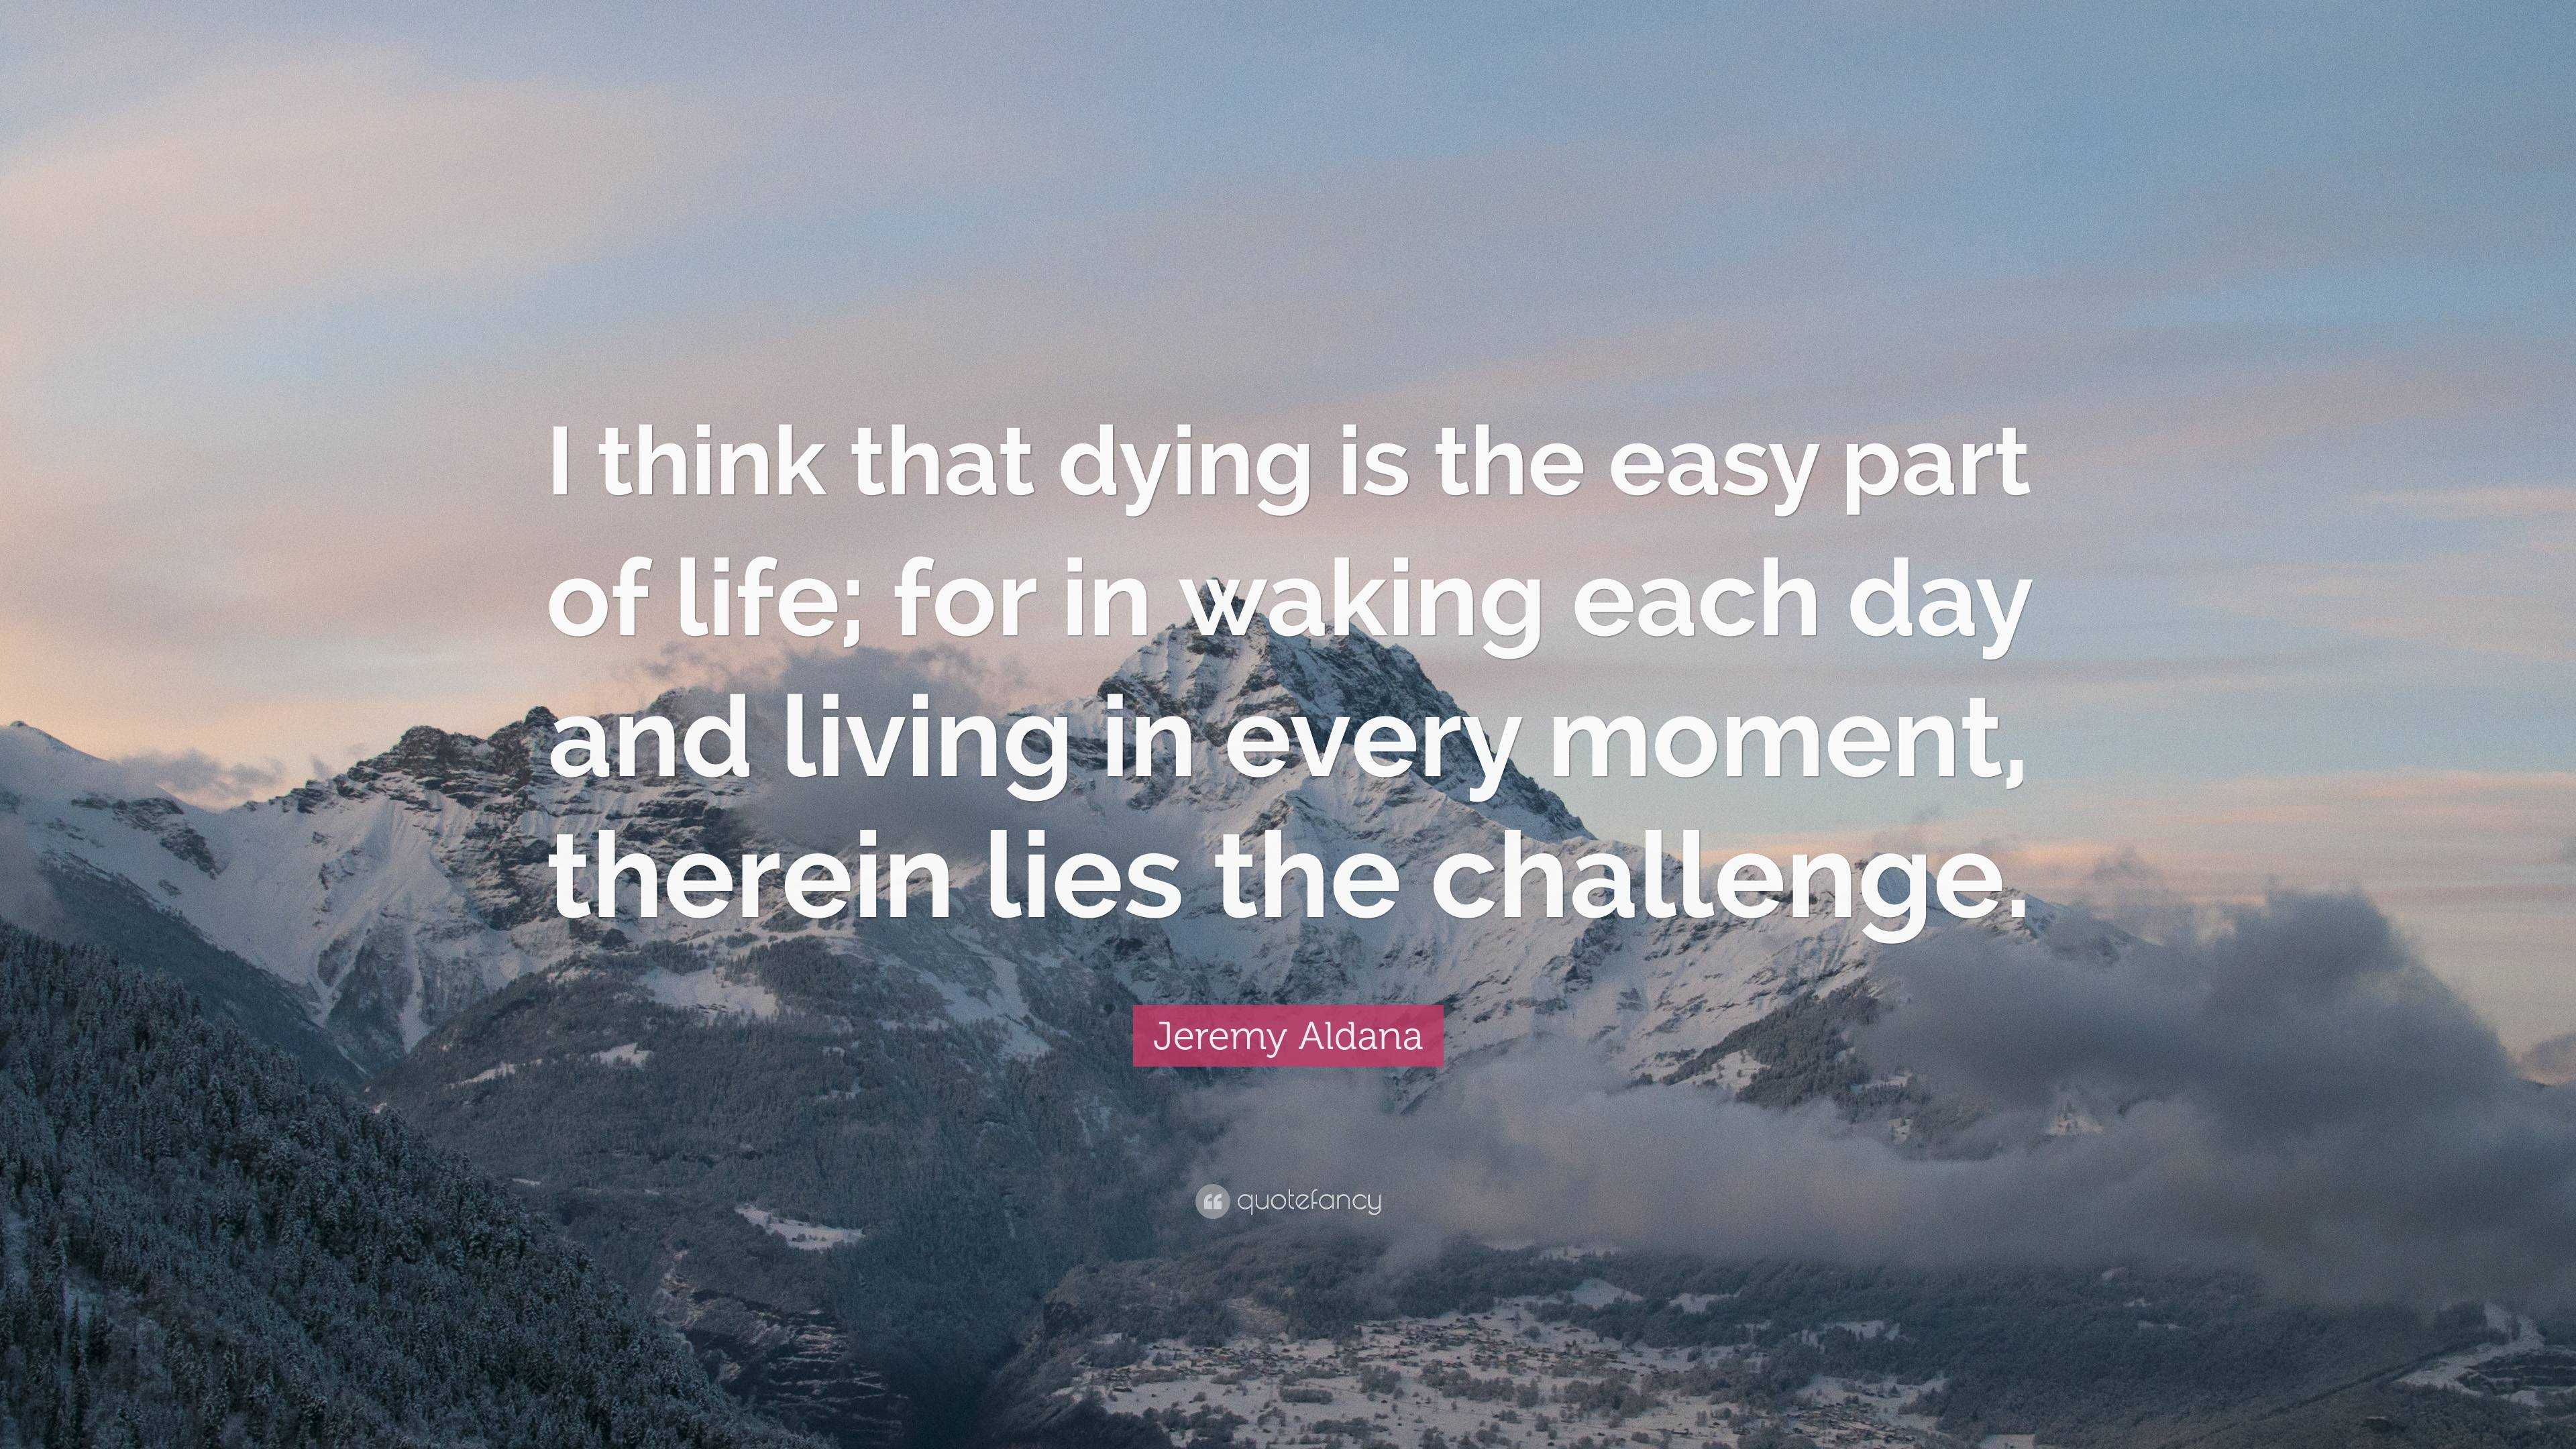 Jeremy Aldana Quote: “I think that dying is the easy part of life; for ...